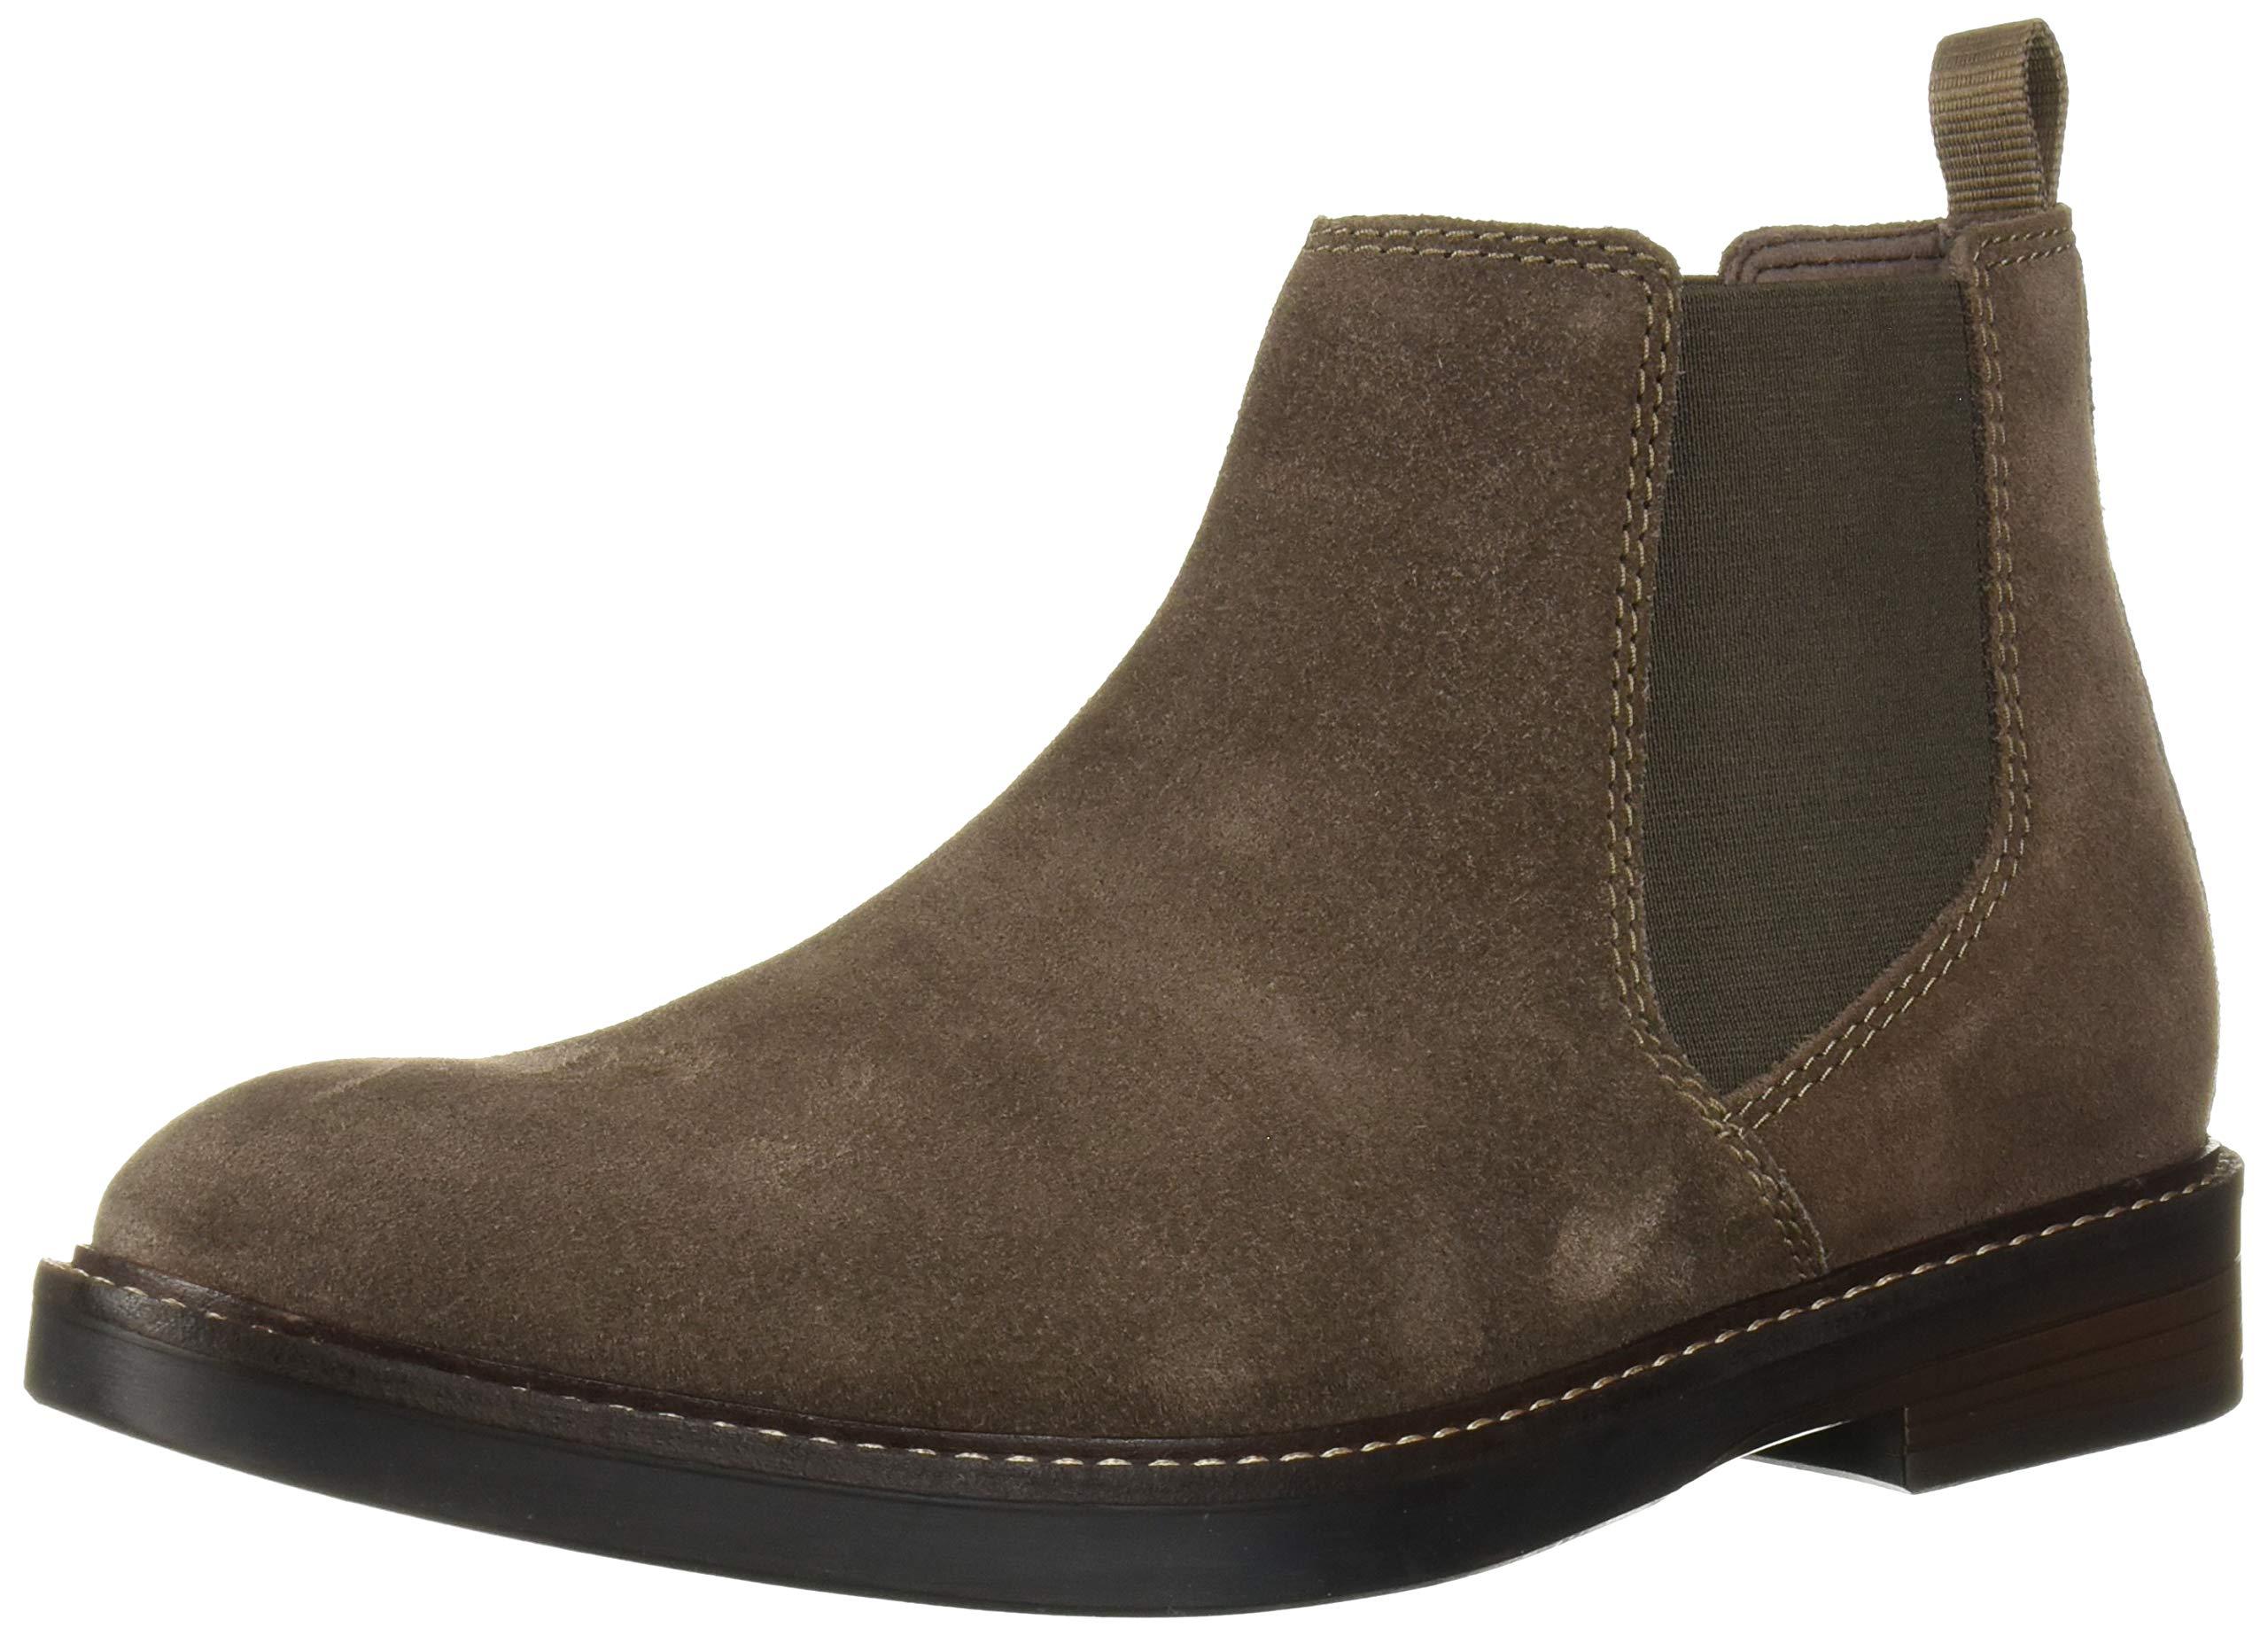 Clarks Paulson Up Chelsea Boot in Taupe Suede (Brown) for Men - Save 35 ...